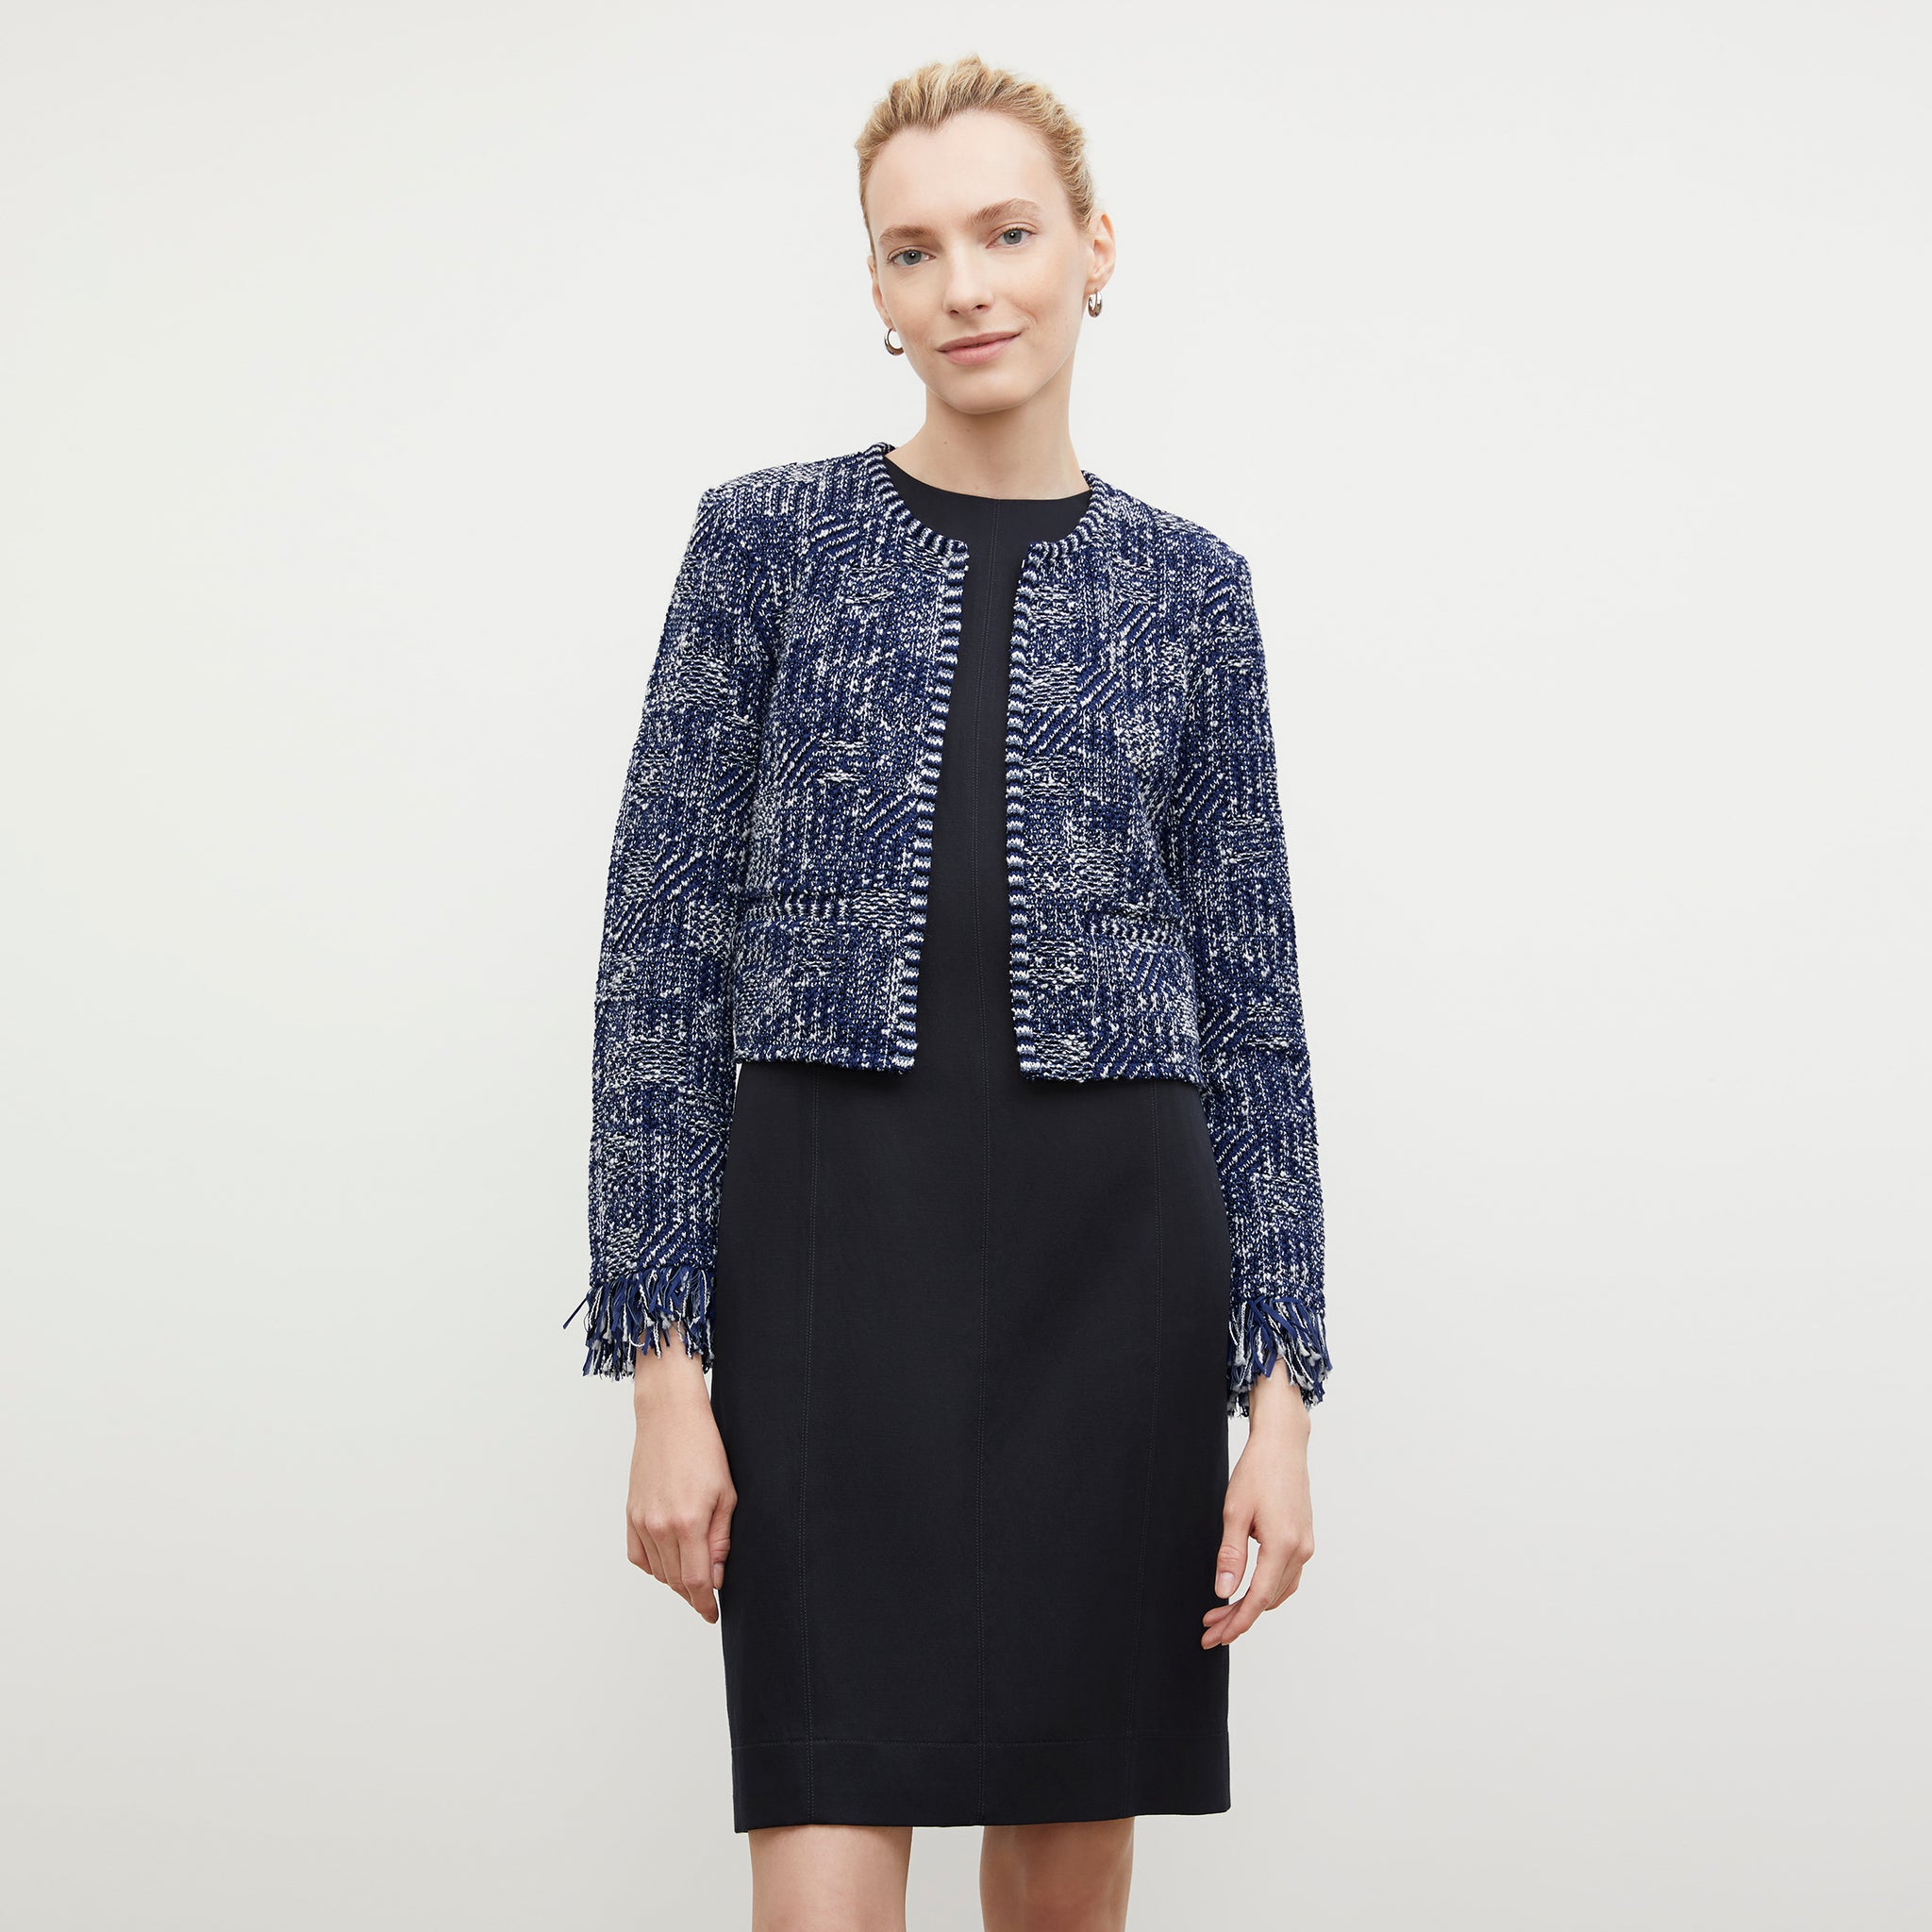 Front image of a woman wearing the Lilia Jacket - Interweave in Navy / Ivory